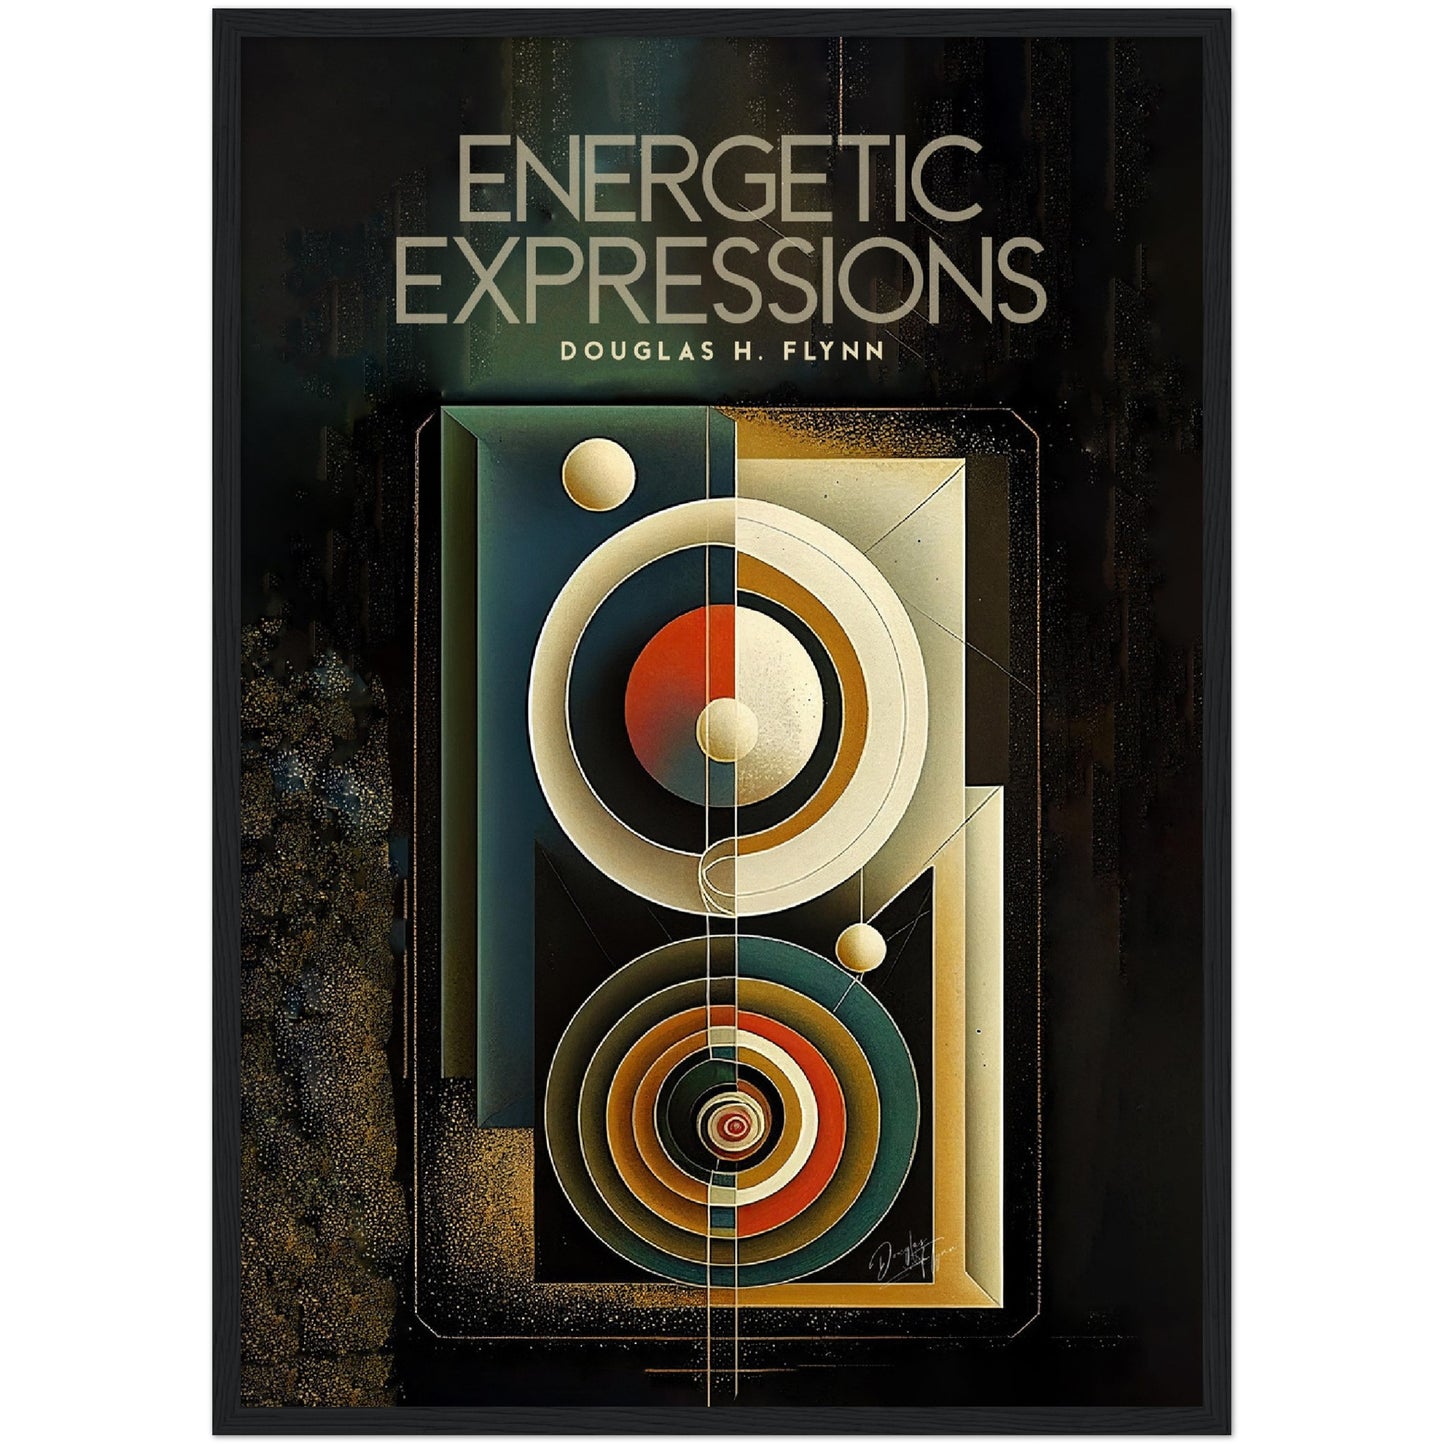 »Energetic Expressions« merch poster